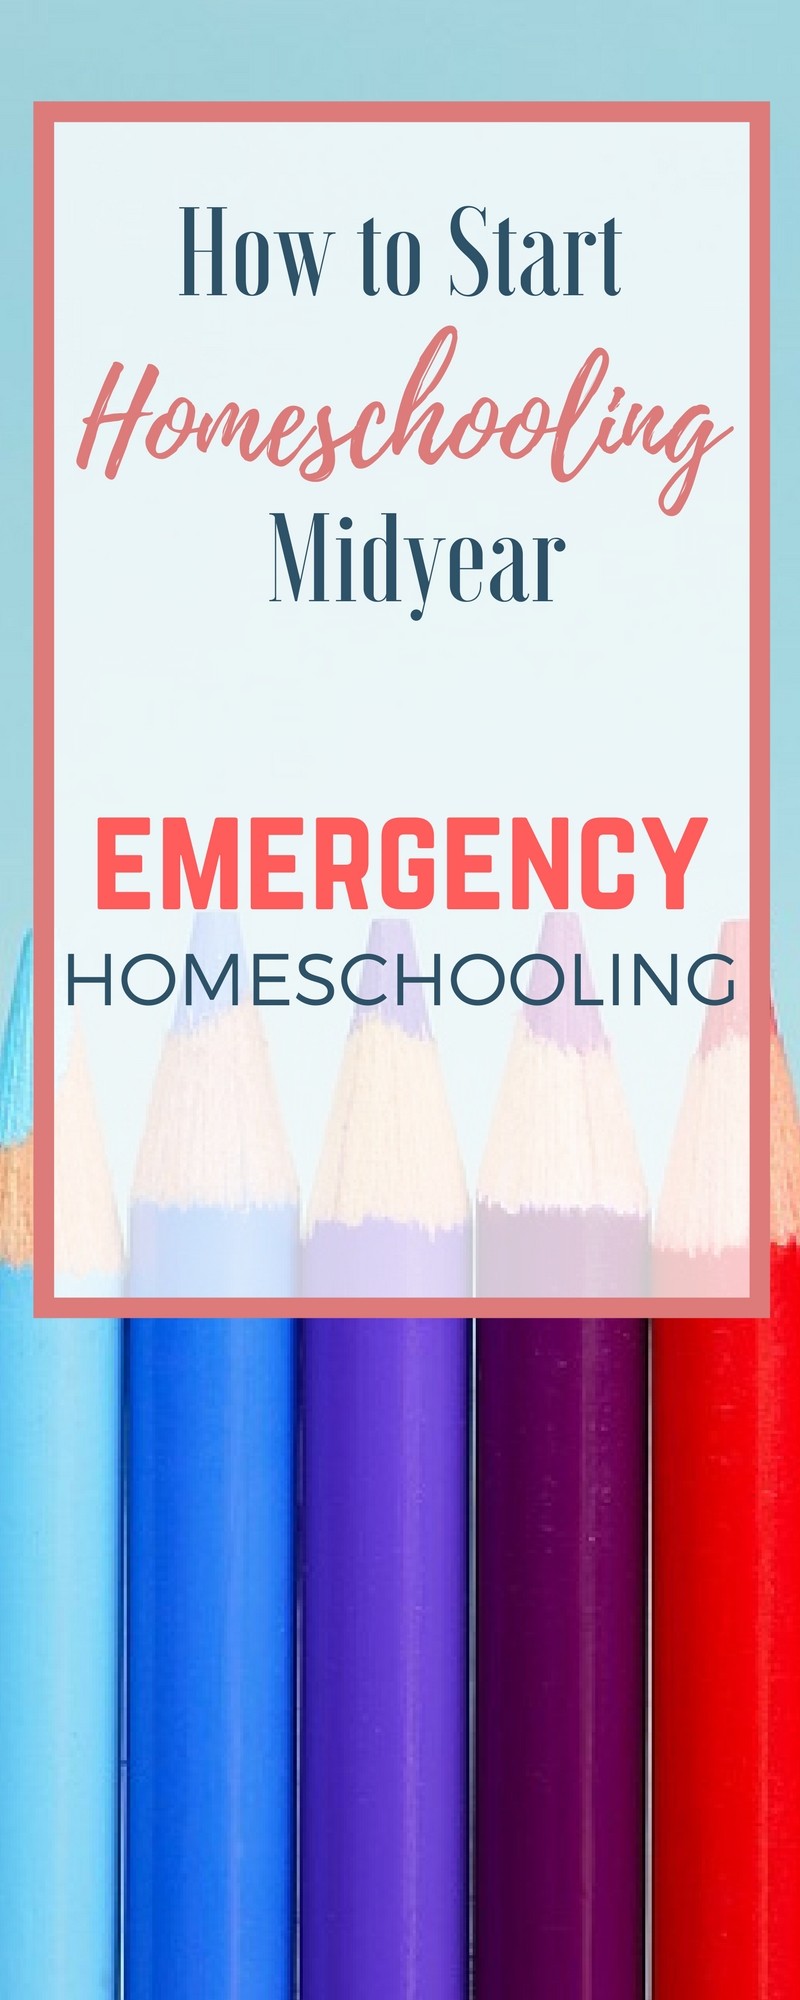 Sometimes we have to make big changes--in the middle of the school year! Here's the advice I gave a friend wondering how to start homeschooling midyear.